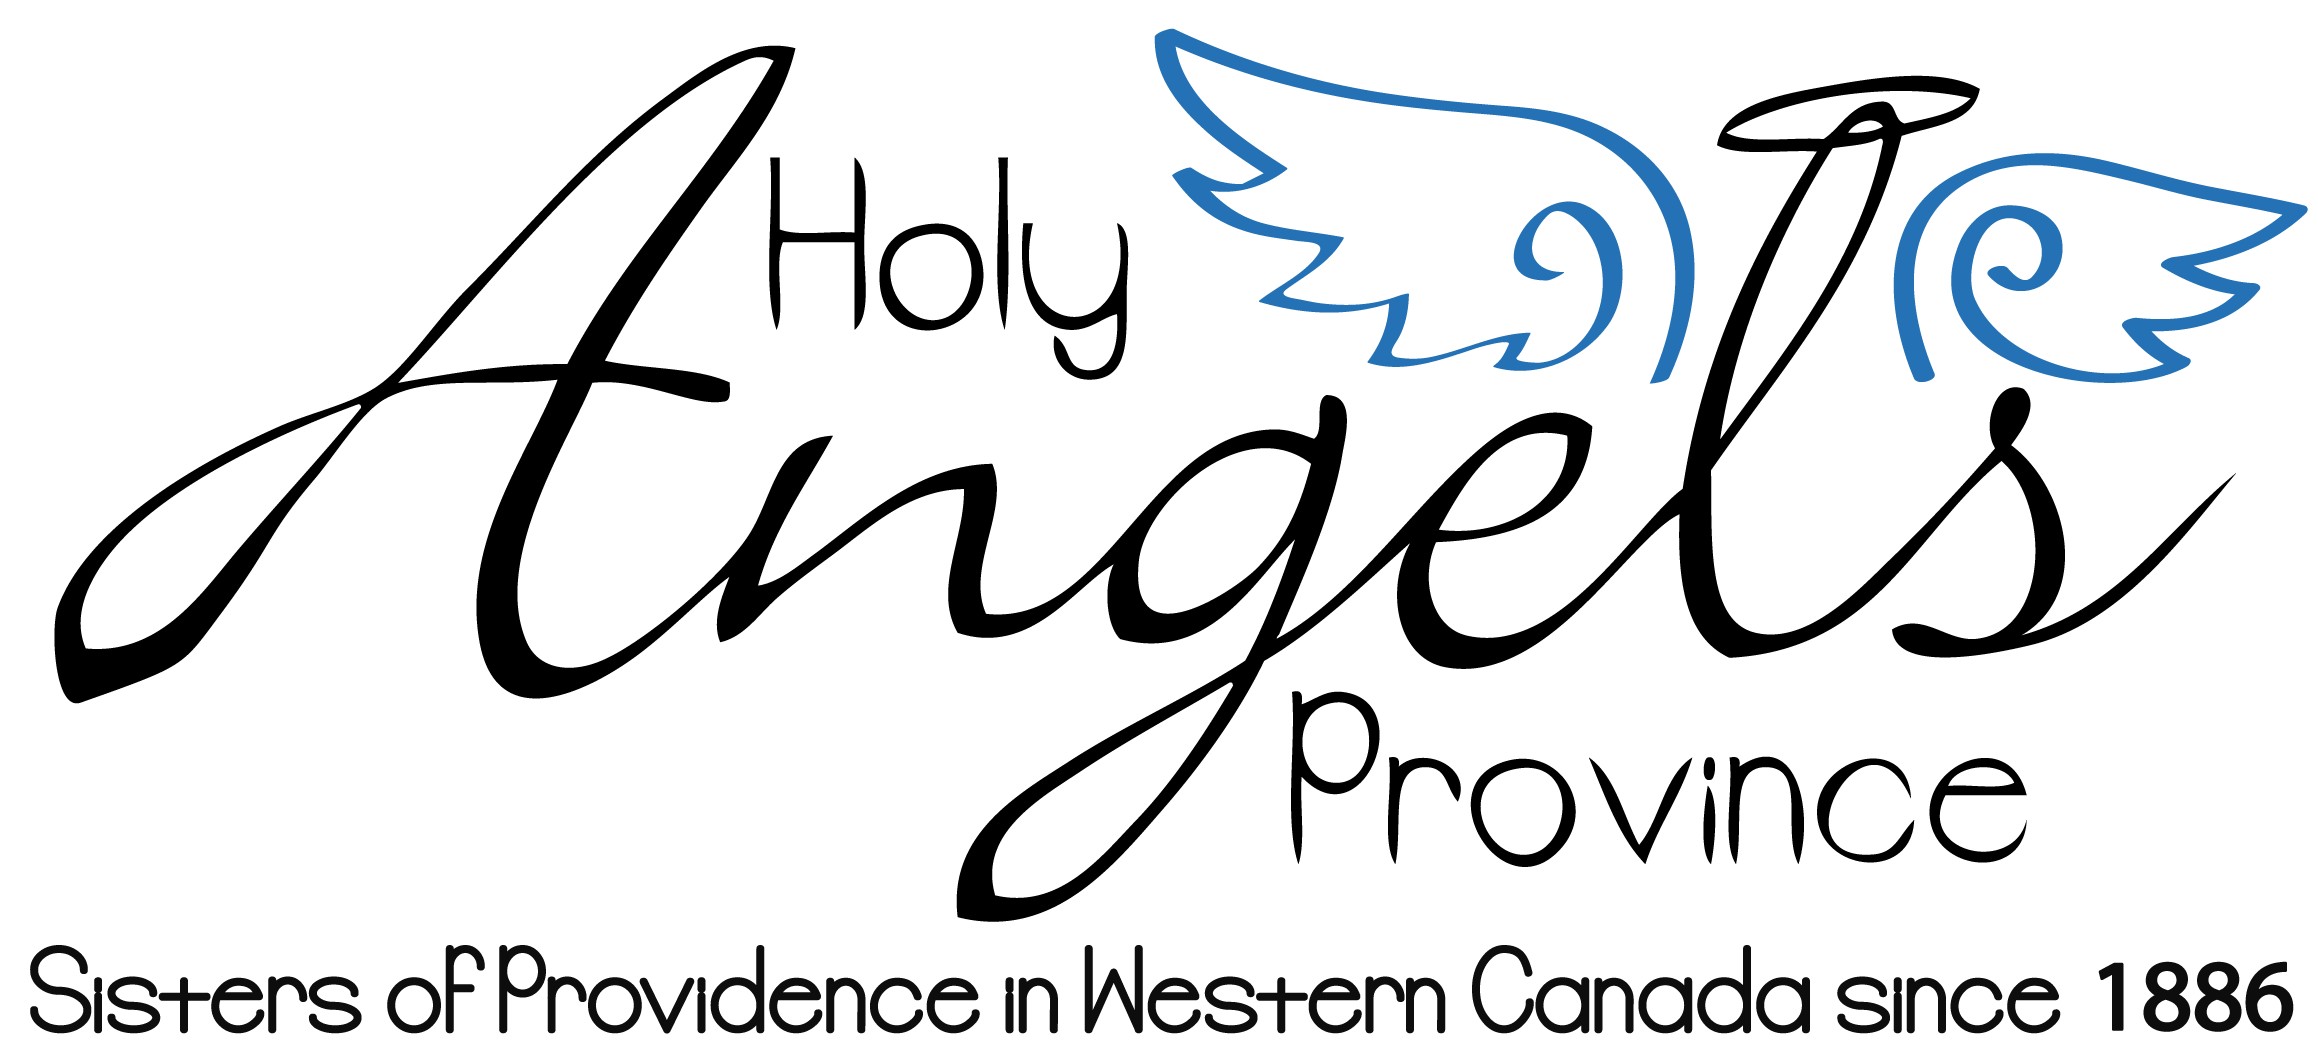 100th Anniversary of Holy Angels Province - The Sisters of Providence